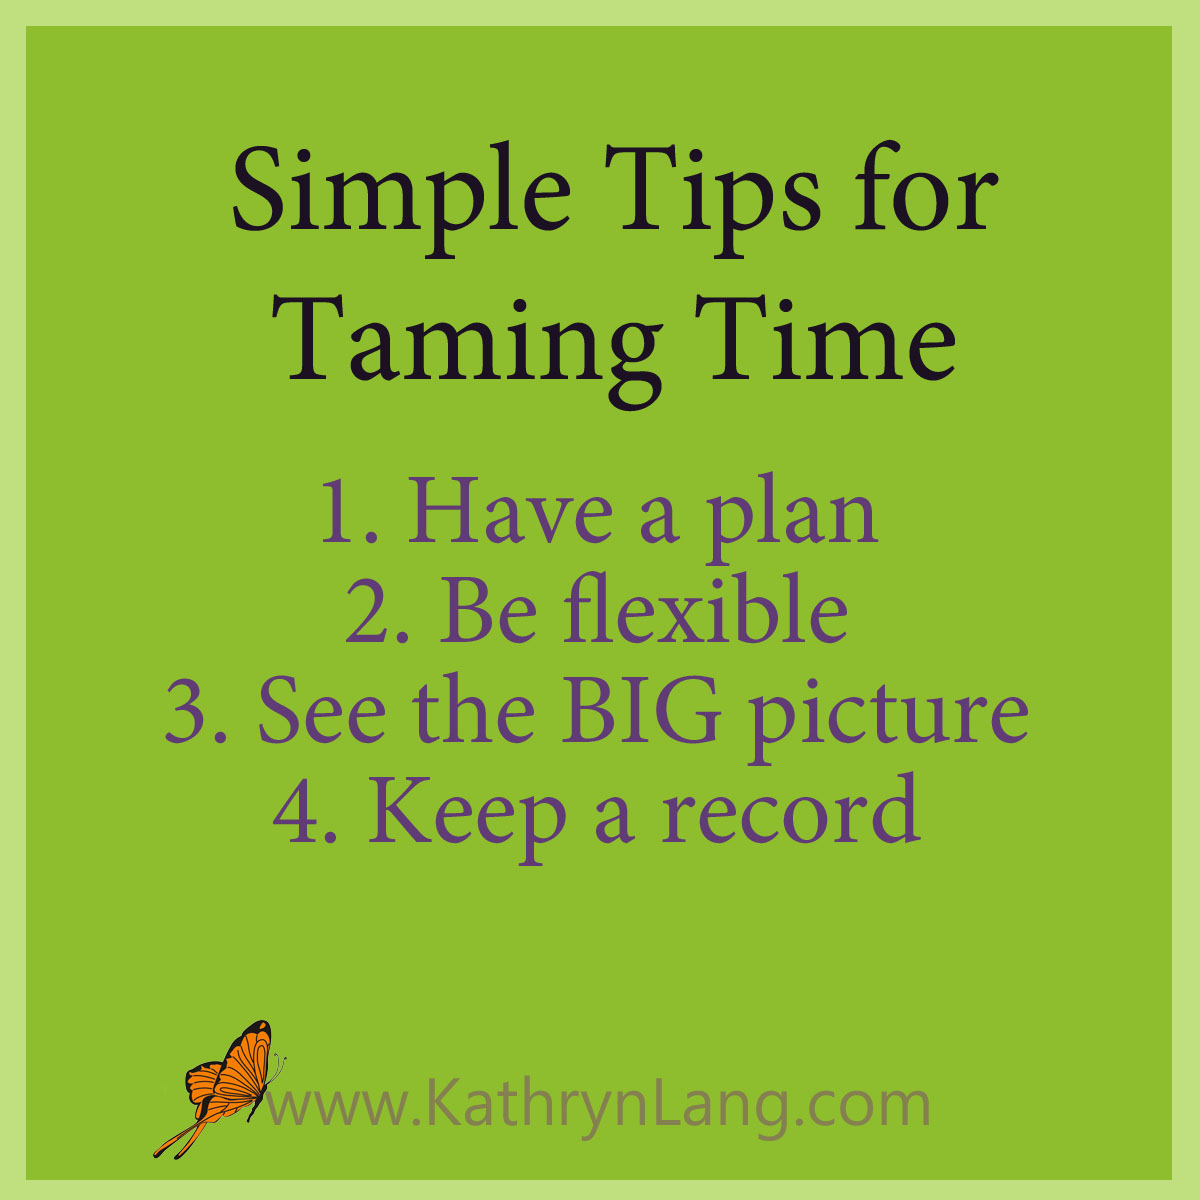 Tips for Taming Time